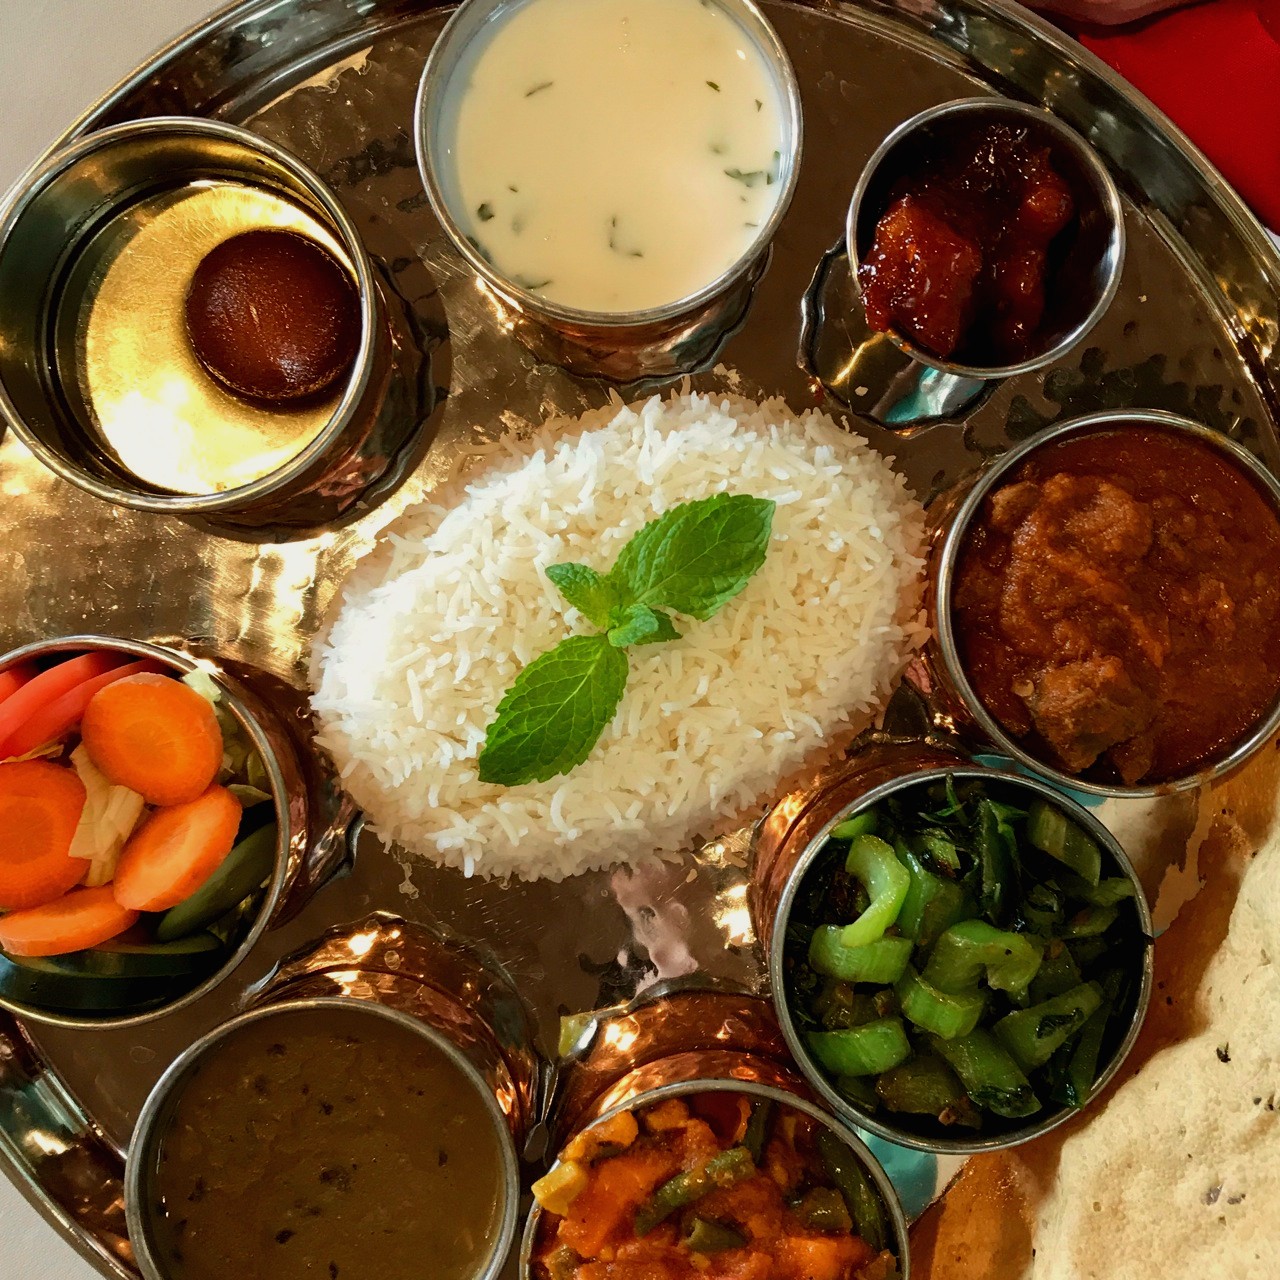 View of rice and various toppings on silver platter at Everest restaurant